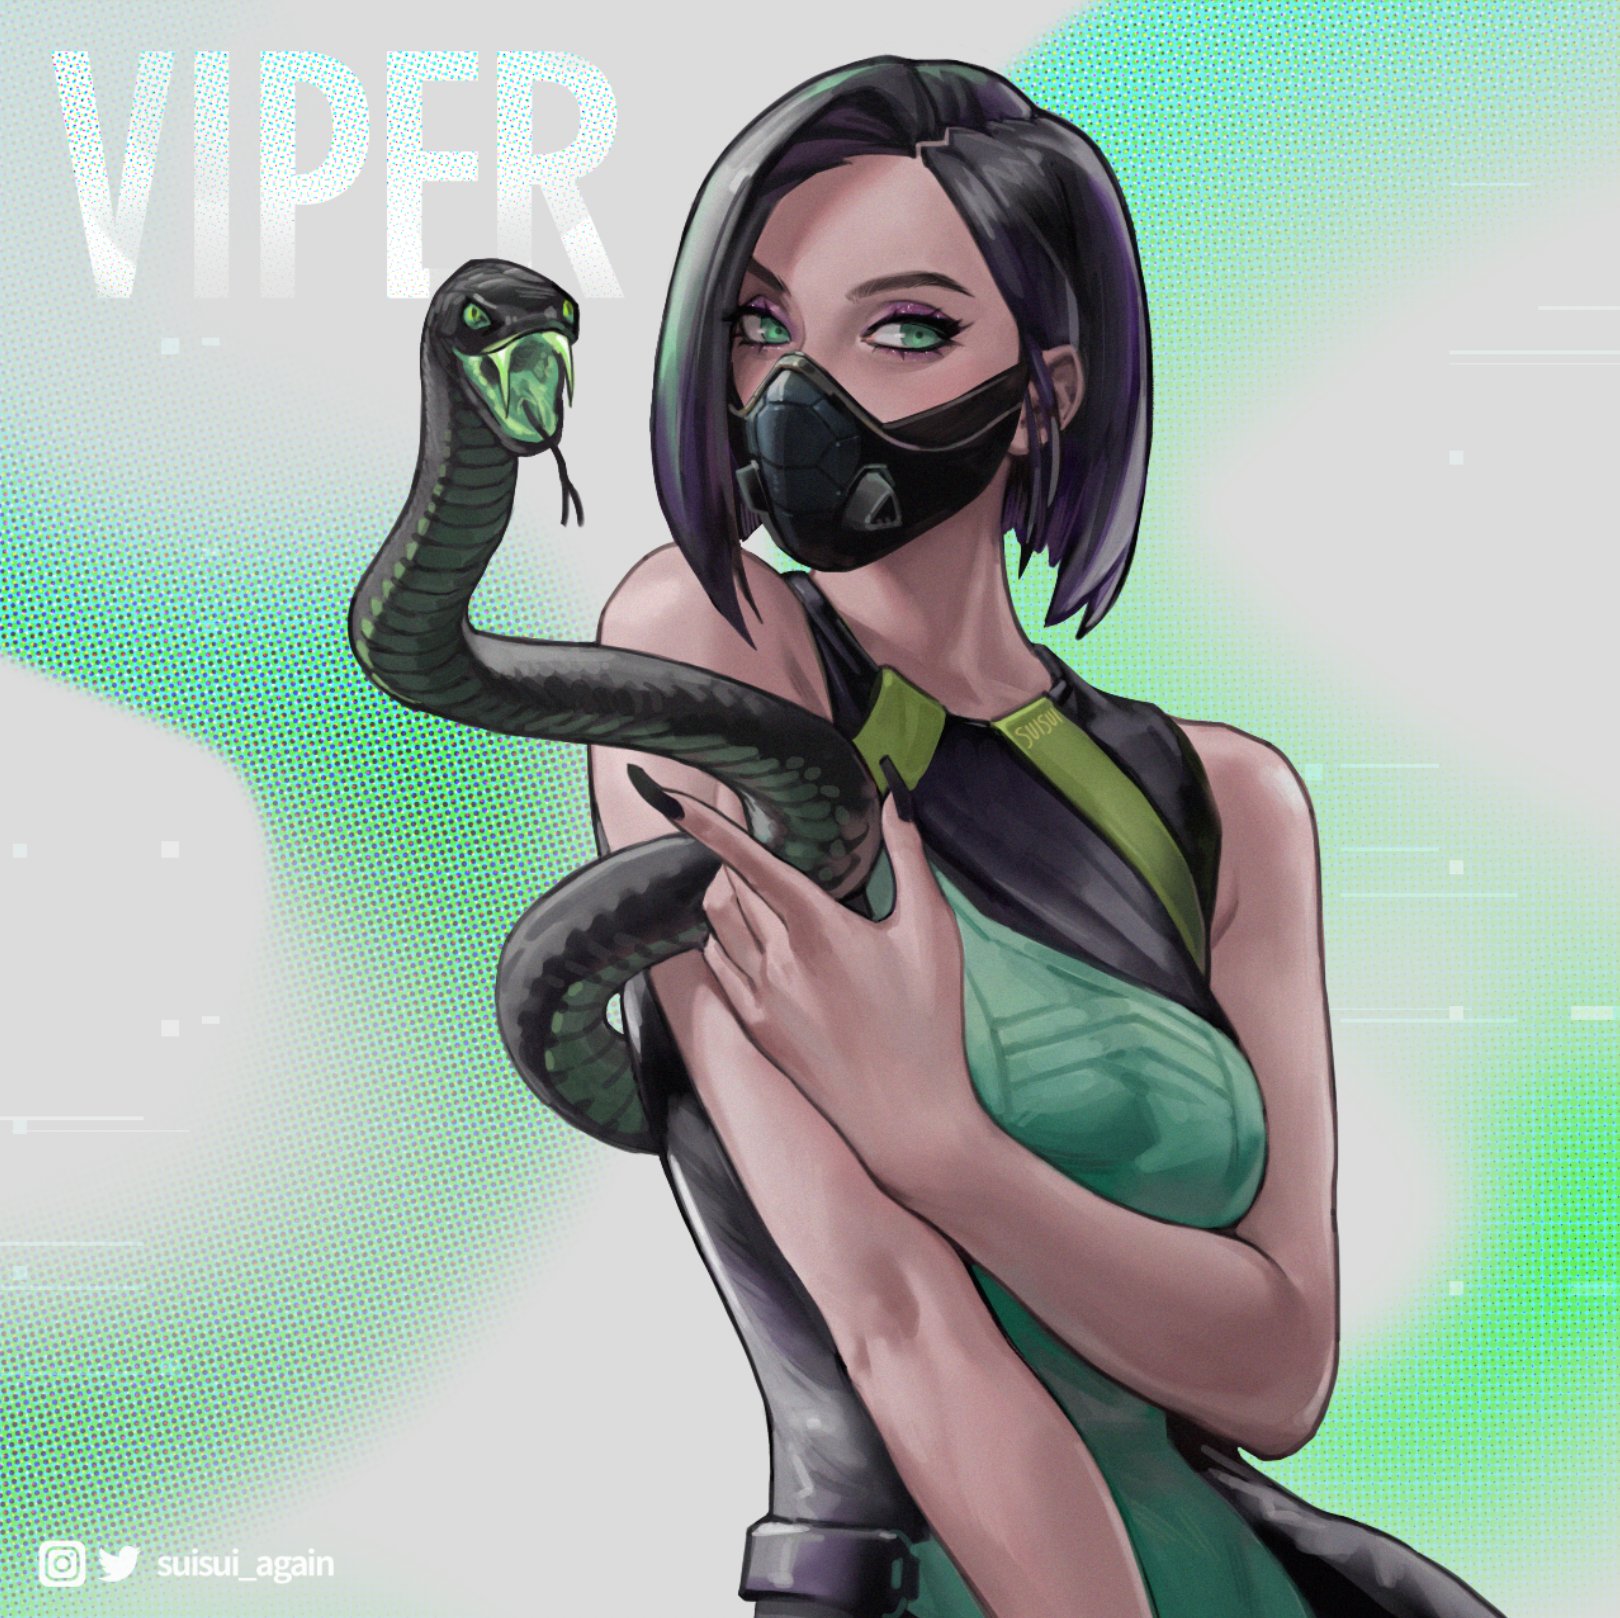 Valorant Riot Games SUiSUi Viper Valorant Video Games Girls Video Game Characters Dark Hair Green Ey 1620x1618